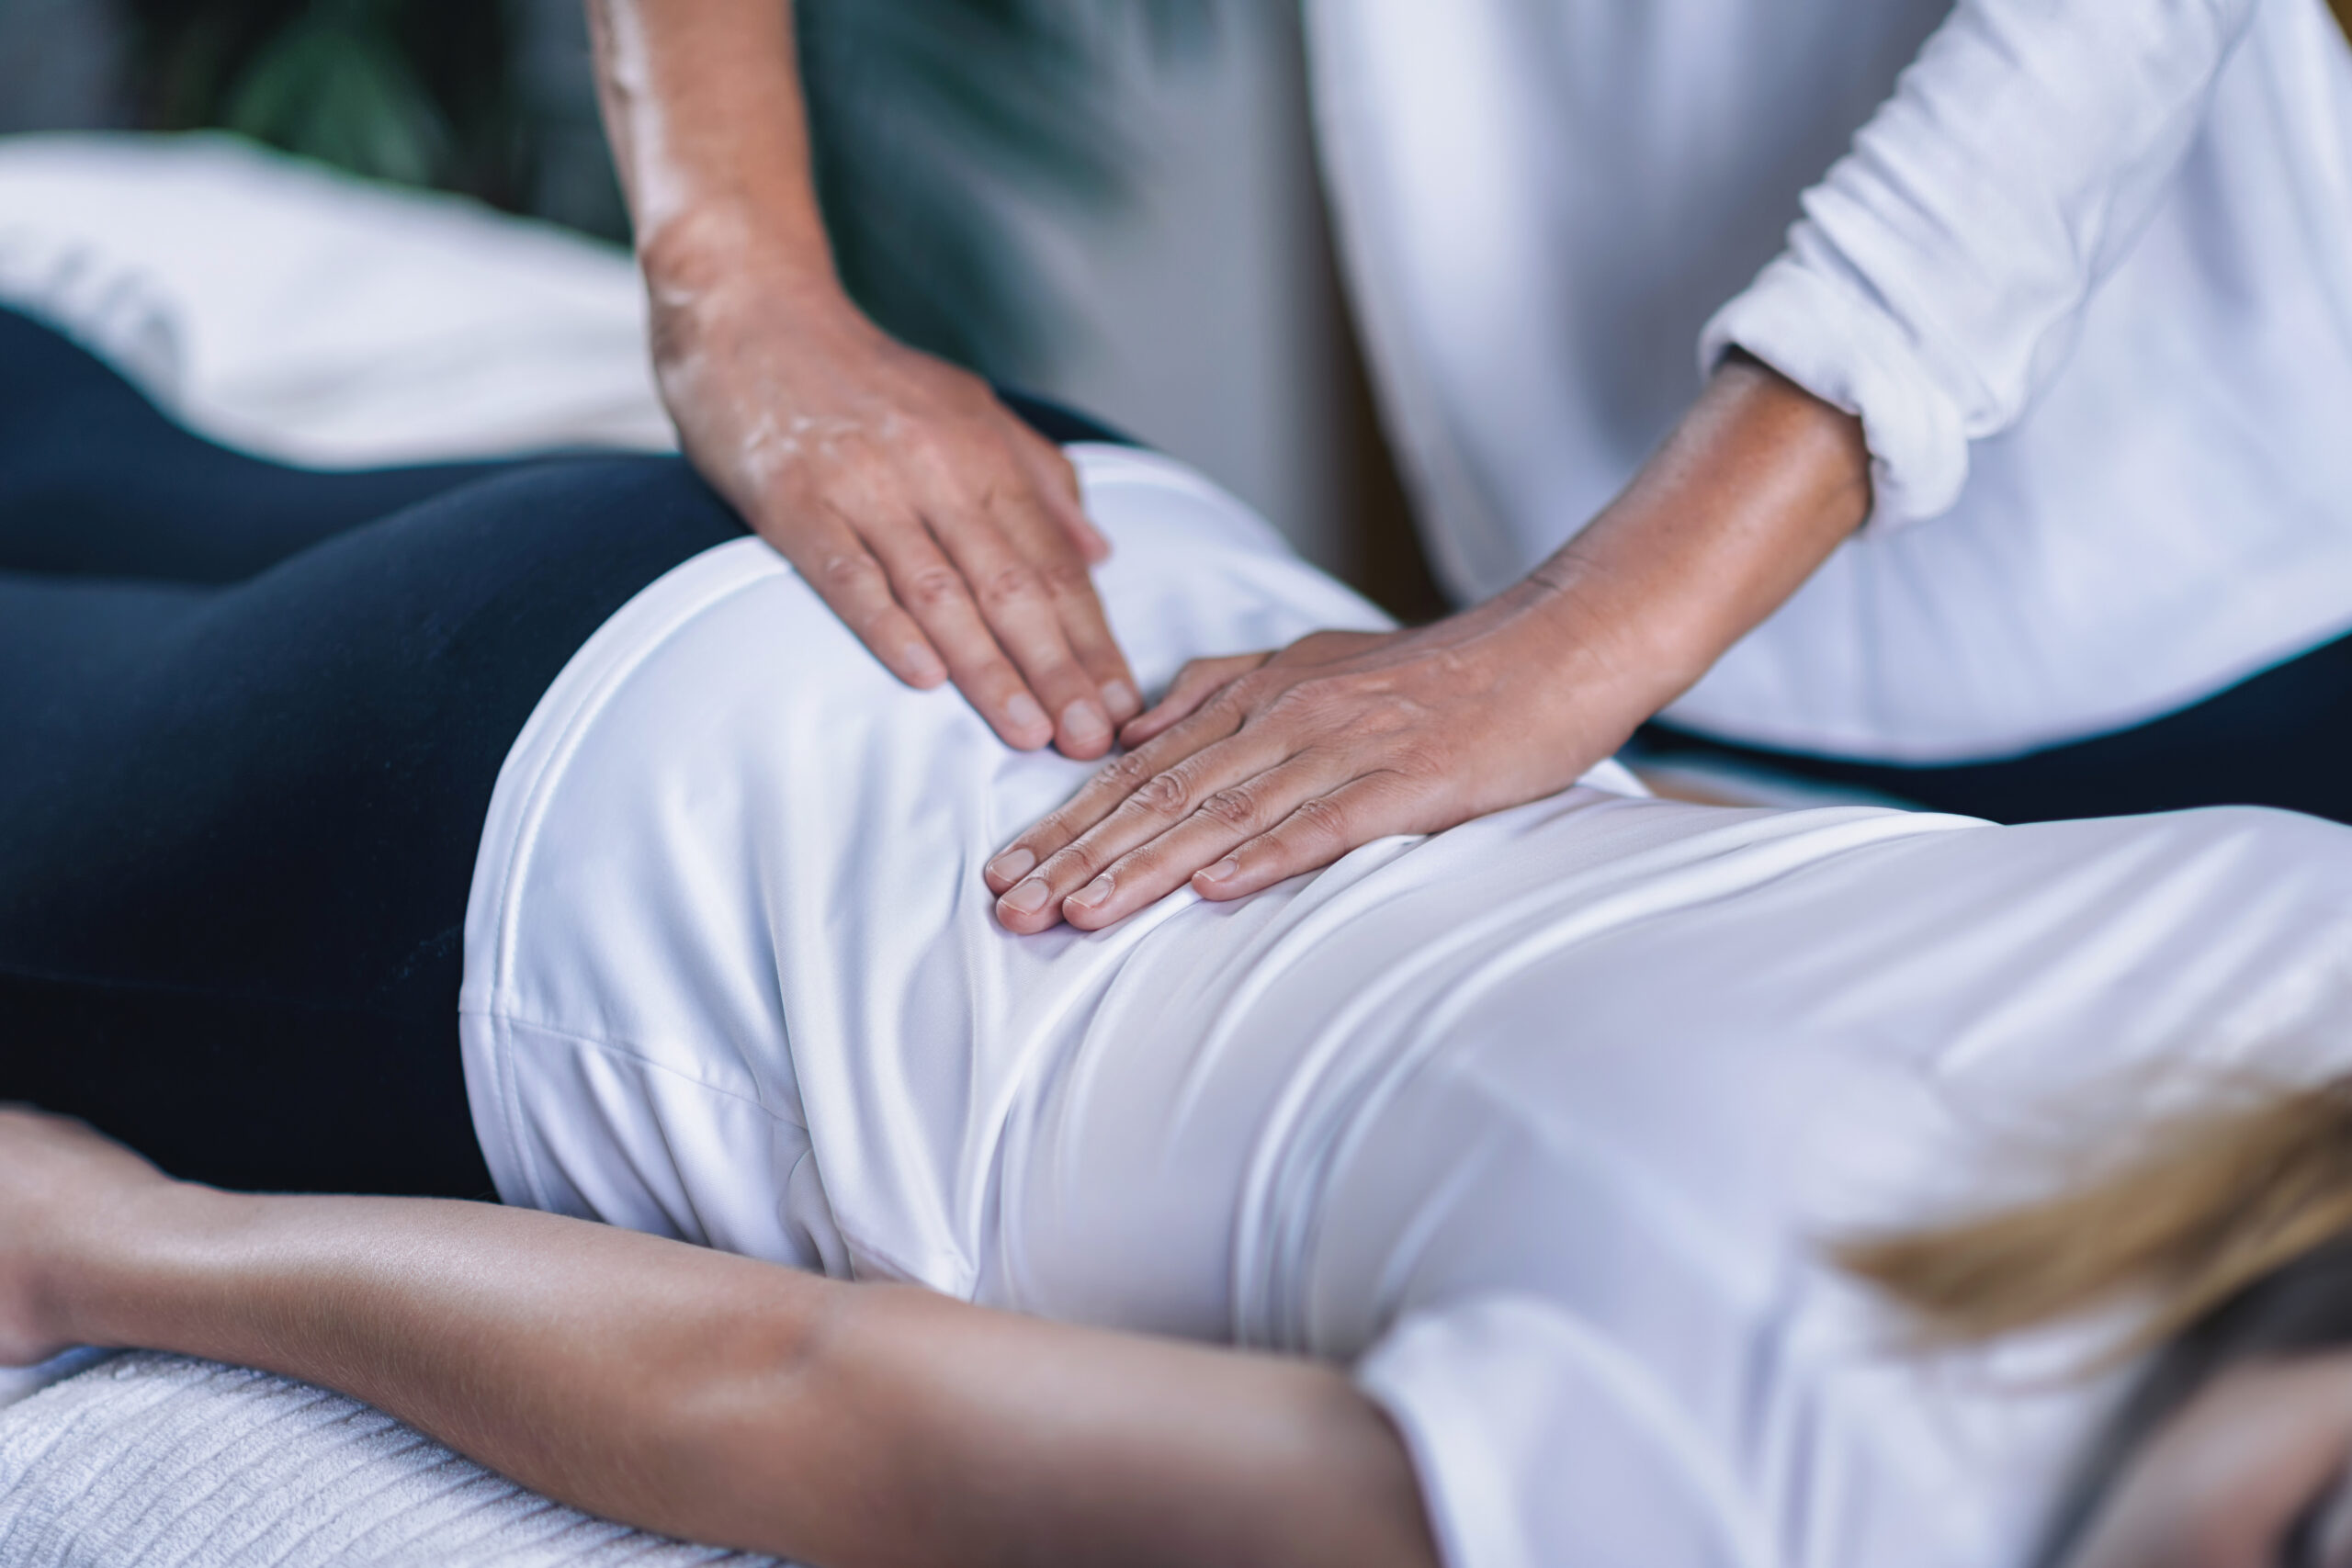 Your Holistic Solutions for Living with Back Pain